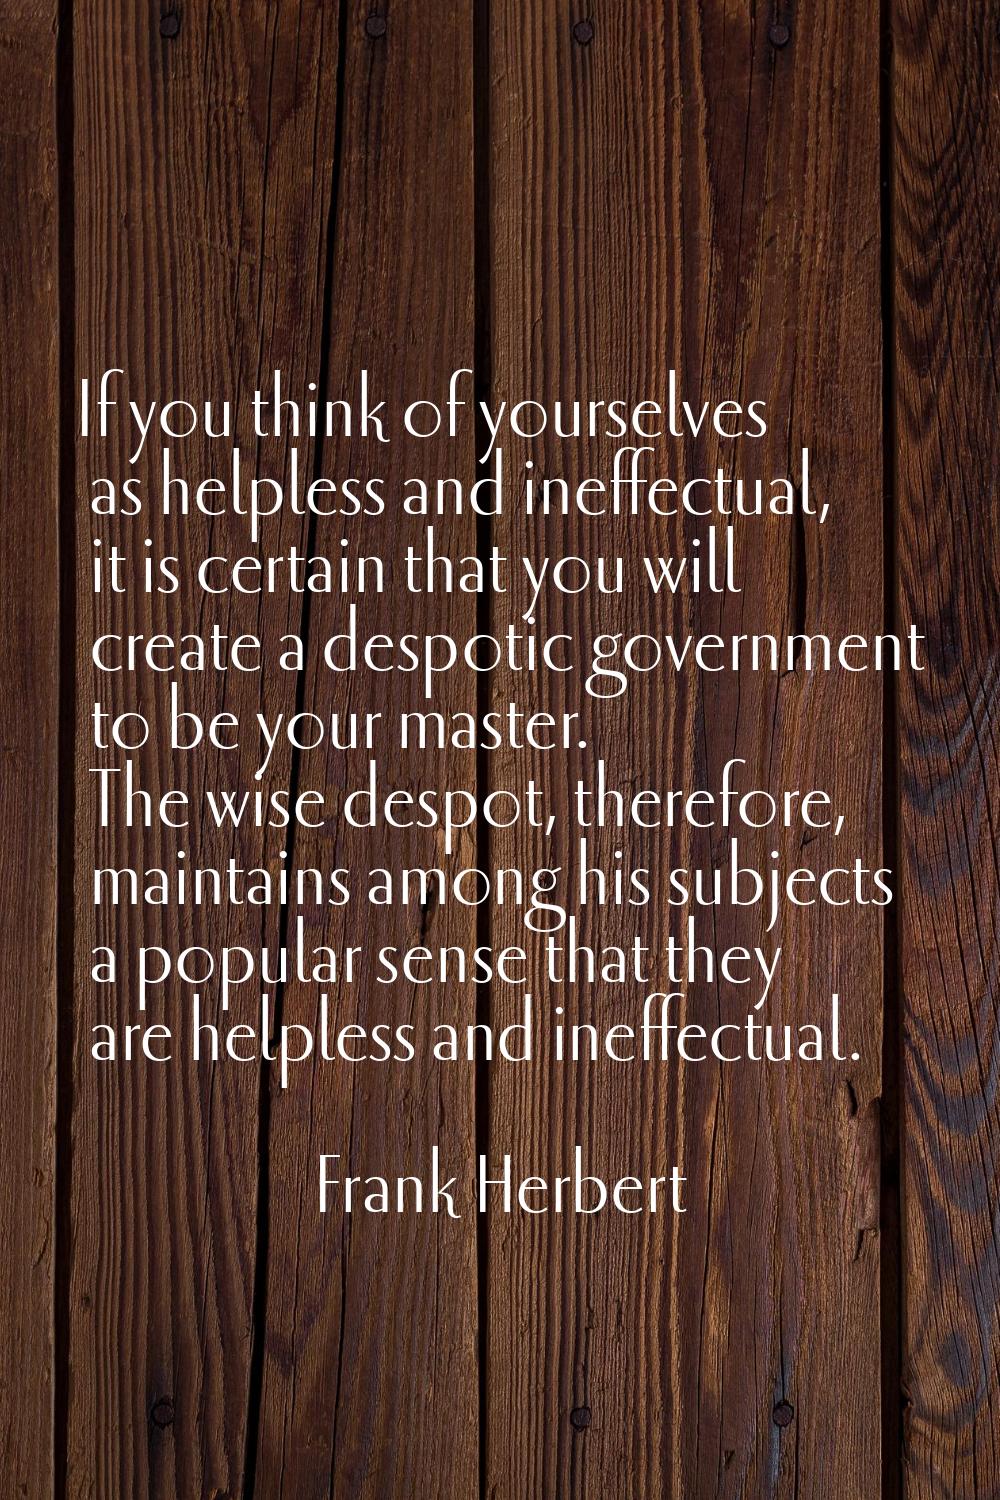 If you think of yourselves as helpless and ineffectual, it is certain that you will create a despot